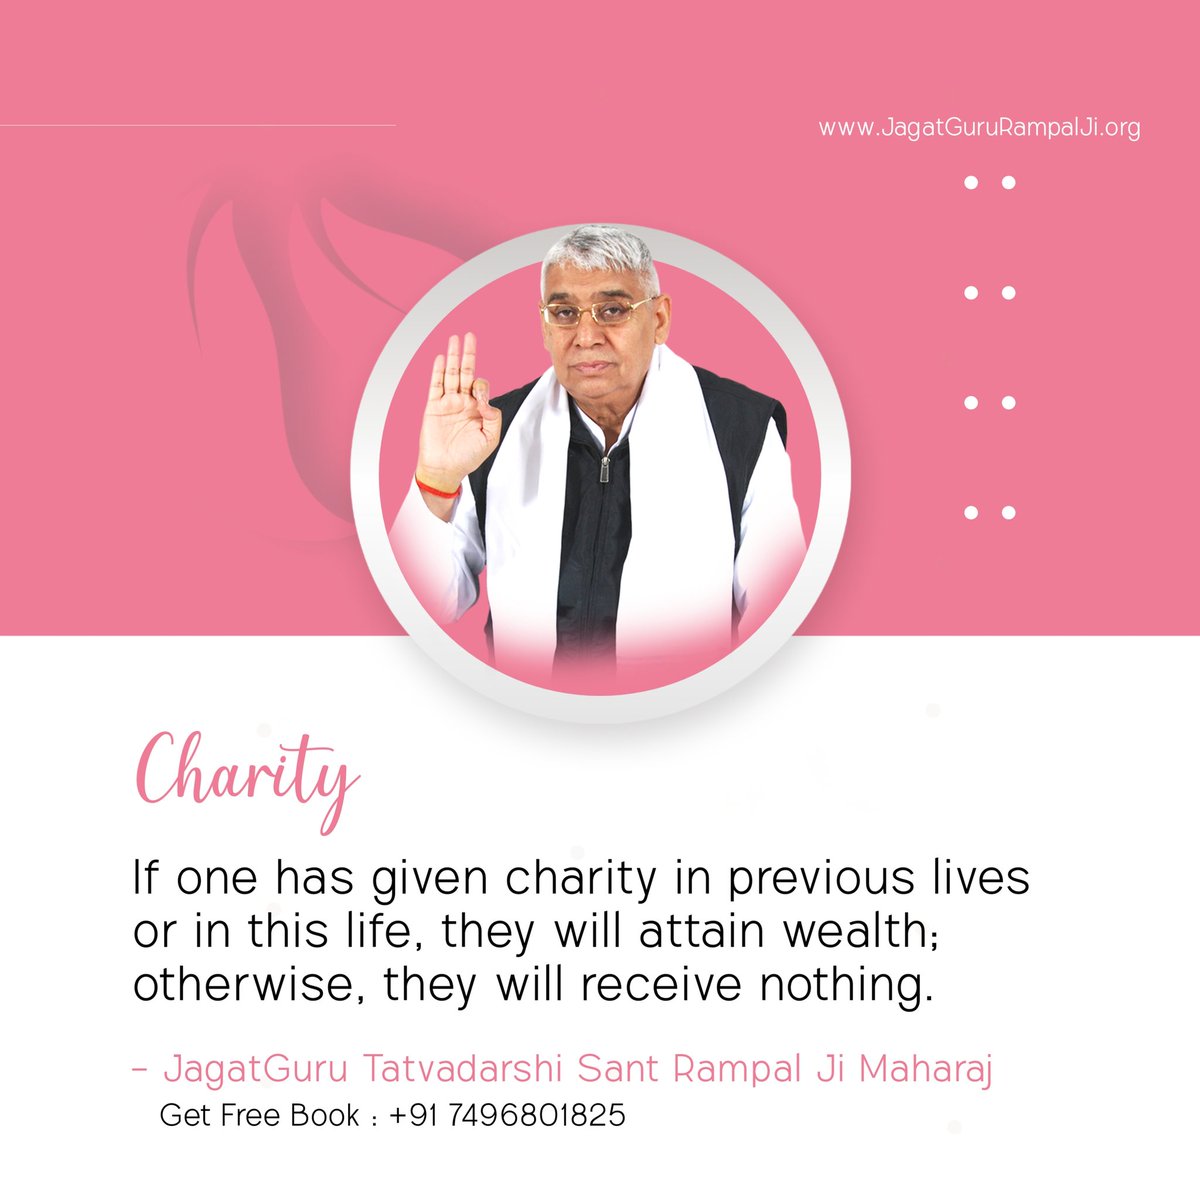 #GodMorningWednesday 
CHARITY
-----------
If one has gone charity in previous lives or in this life, they will attain wealth; otherwise, they will receive nothing.
~JagatGuru Tatvadarshi Sant Rampal Ji Maharaj
Visit Satlok Ashram YouTube Channel 
#WednesdayMotivation